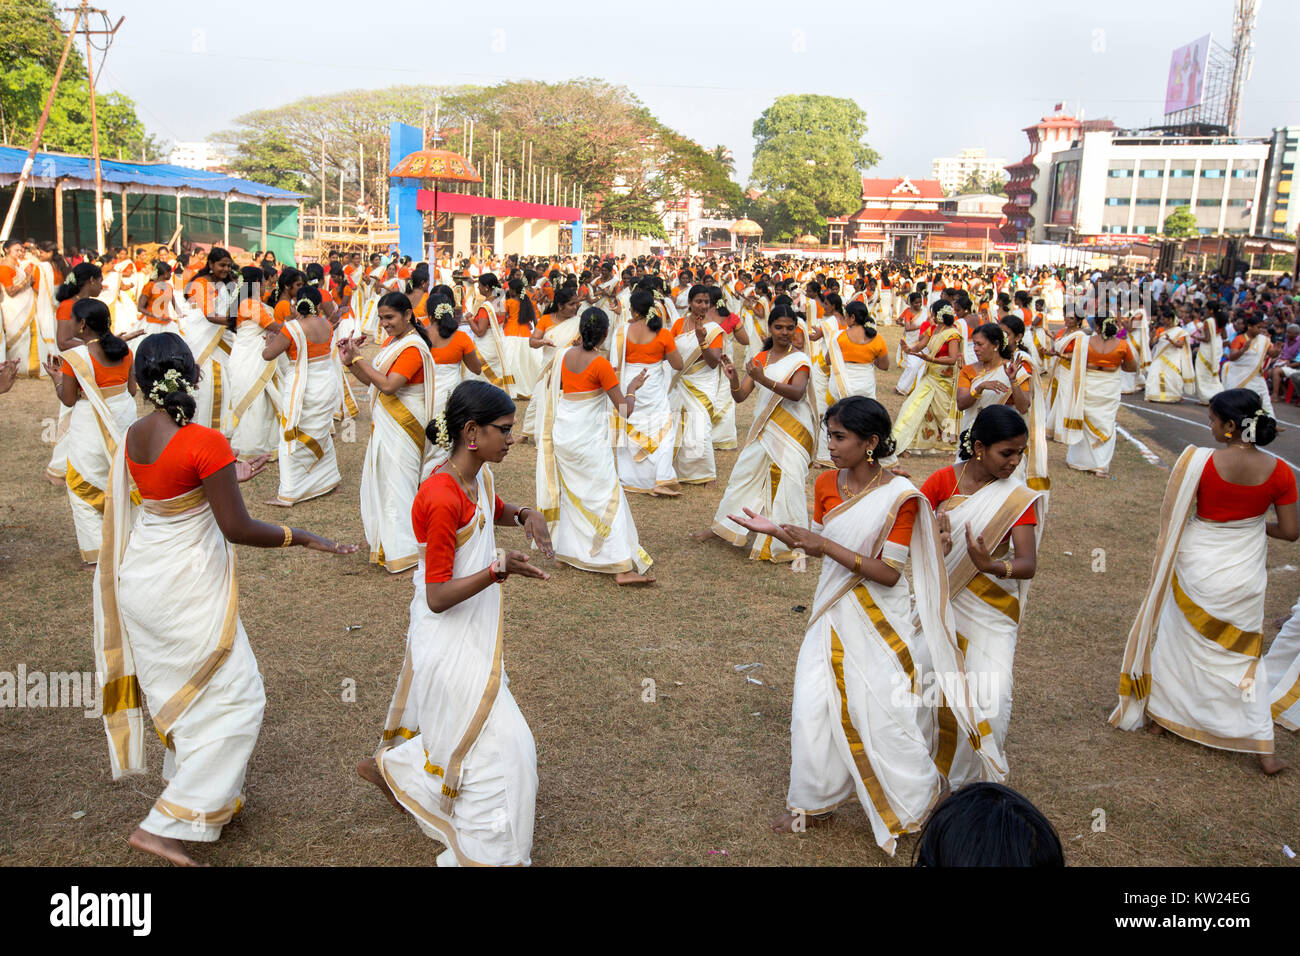 Thissur, India. 30th Dec, 2017. more than 1200 women participated in this event.the event was conducted by kerala kshethra samrakshana samithi.The dancers began with an invocation to Lord Ganesa. The participants danced to Thiruvathirapattu, Kathakali padam, Kummi, Kurathipattu and Vanchipattu. Thiruvathirakali is traditionally performed on the day of Thiruvathira in the Malayalam month of Dhanu (December-January). Women dance to the accompaniment of Thiruvathira paattu. The songs refer to Parvati’s longing for Lord Shiva. Credit: pradeep subramanian/Alamy Live News Stock Photo